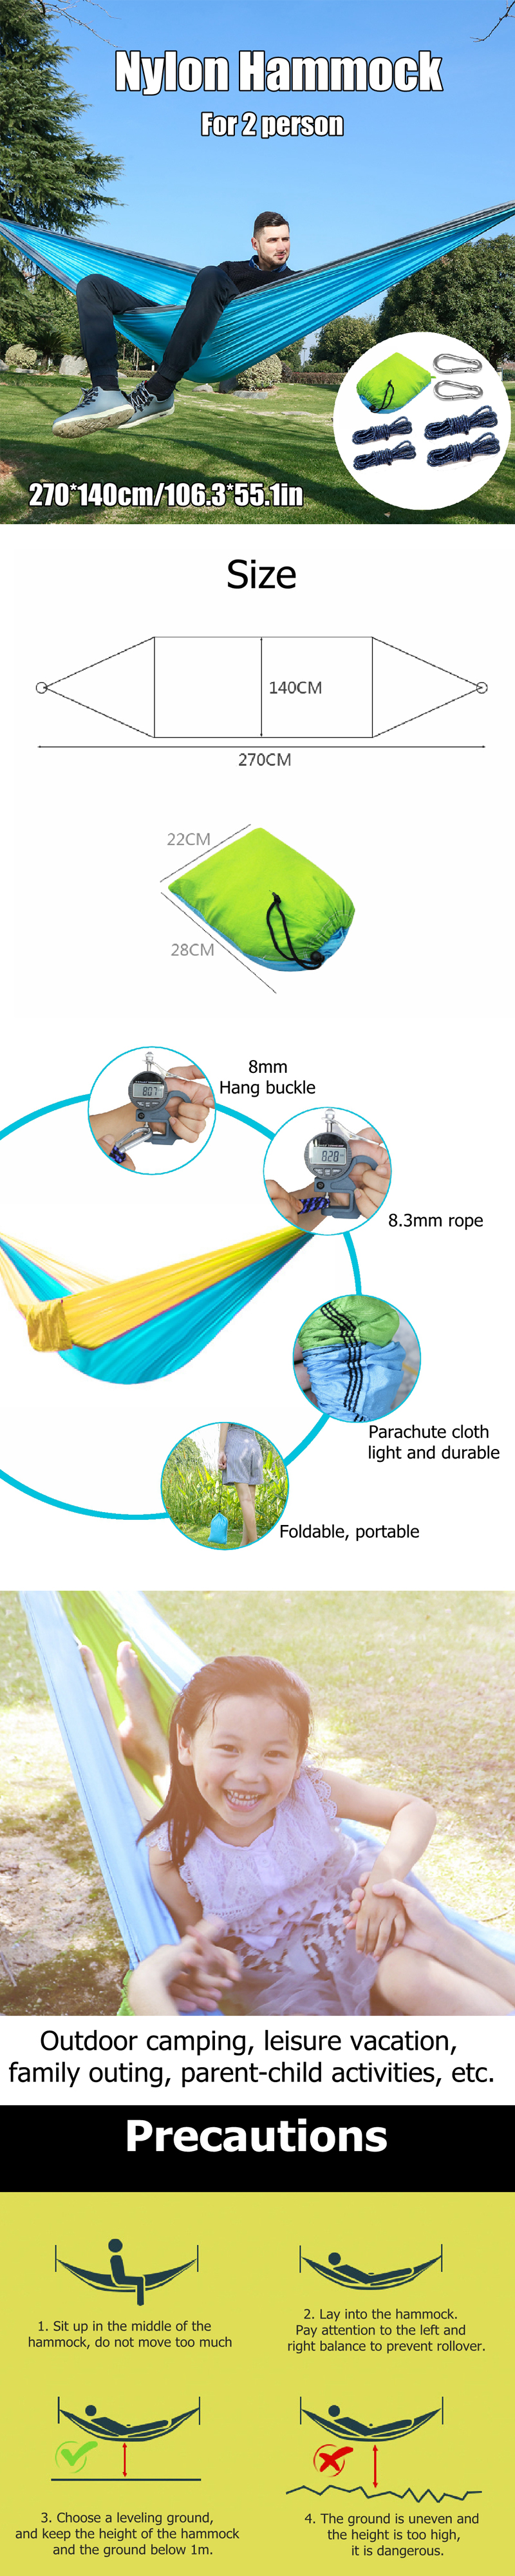 270x140cm-2-People-Hammock-210T-Nylon-Outdoor-Camping-Travel-Hanging-Bed-Swing-Bed-Max-Load-500kg-1548616-1